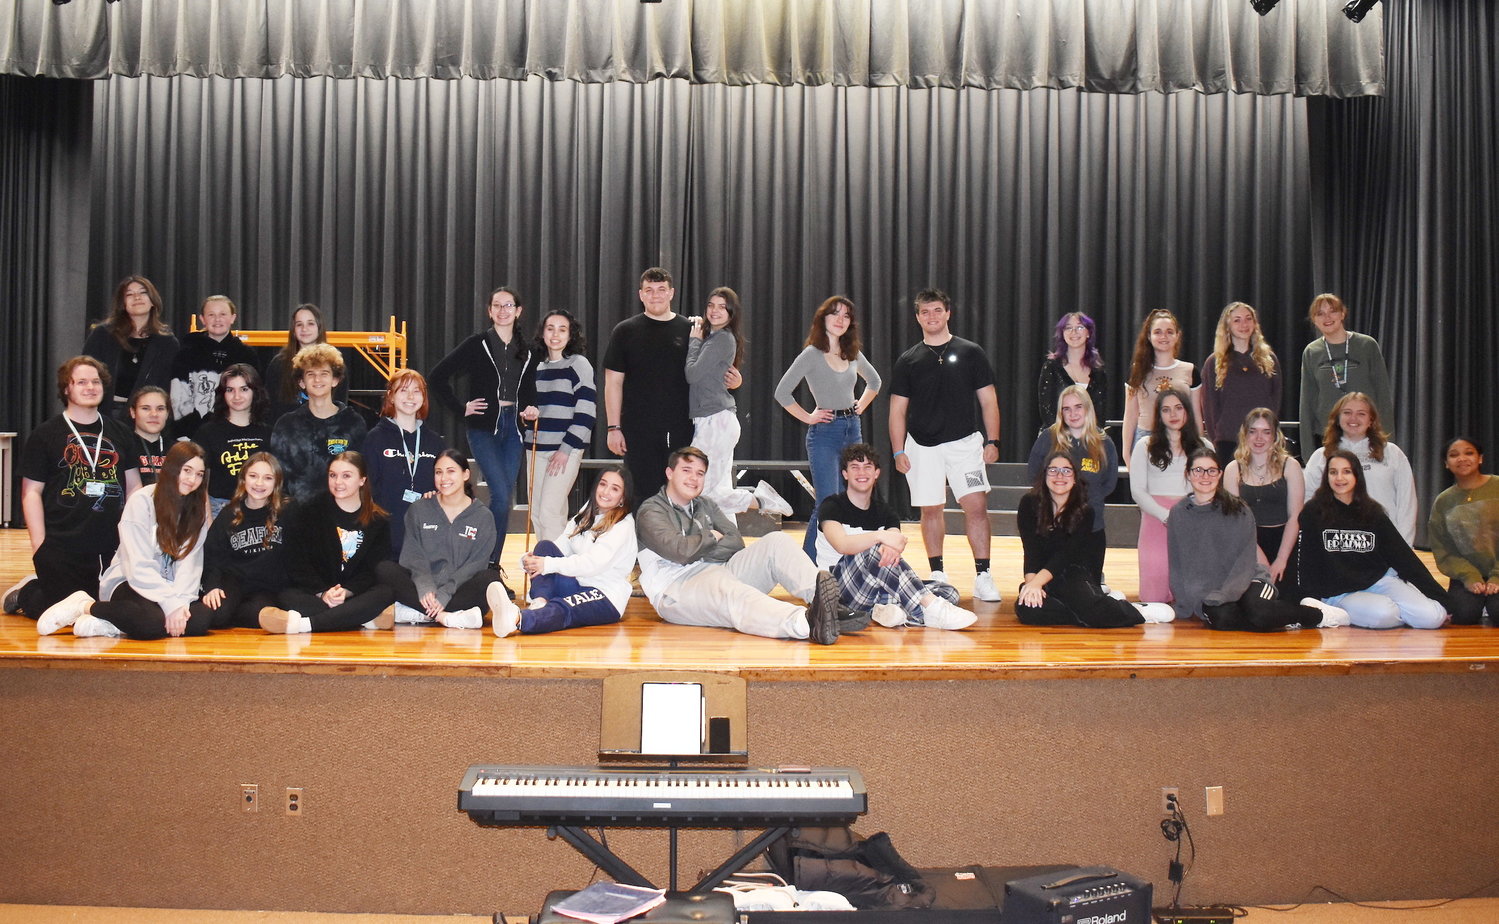 Seaford High School’s production of ‘Young Frankenstein,’ a musical adaptation of the classic Mel Brooks film, will take to the stage next month.